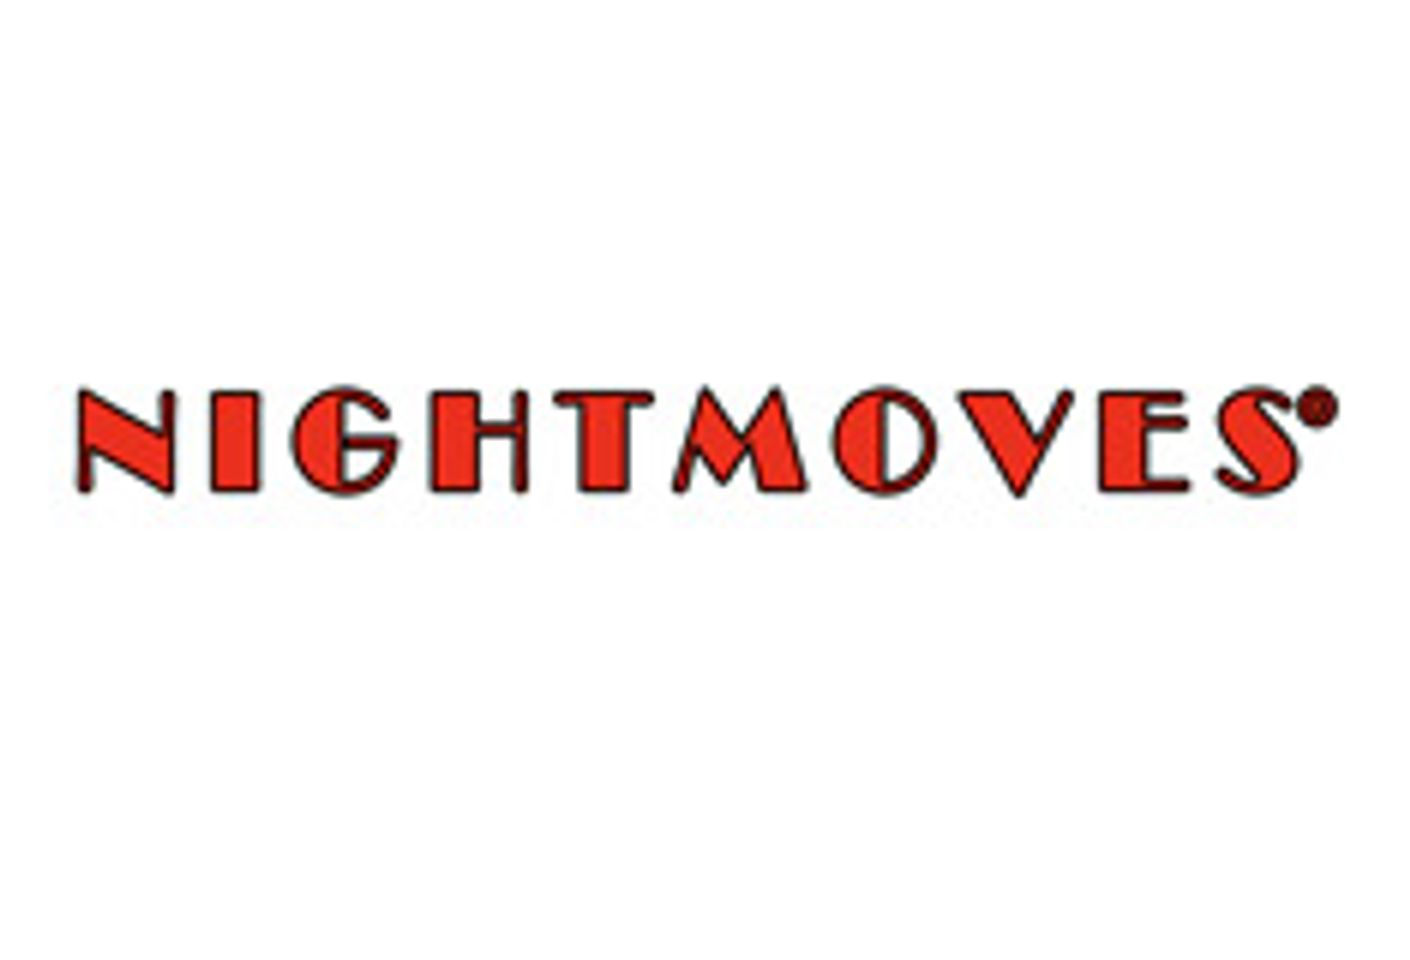 NightMoves Announces Hosts, Performances for 22nd Annual Awards Show